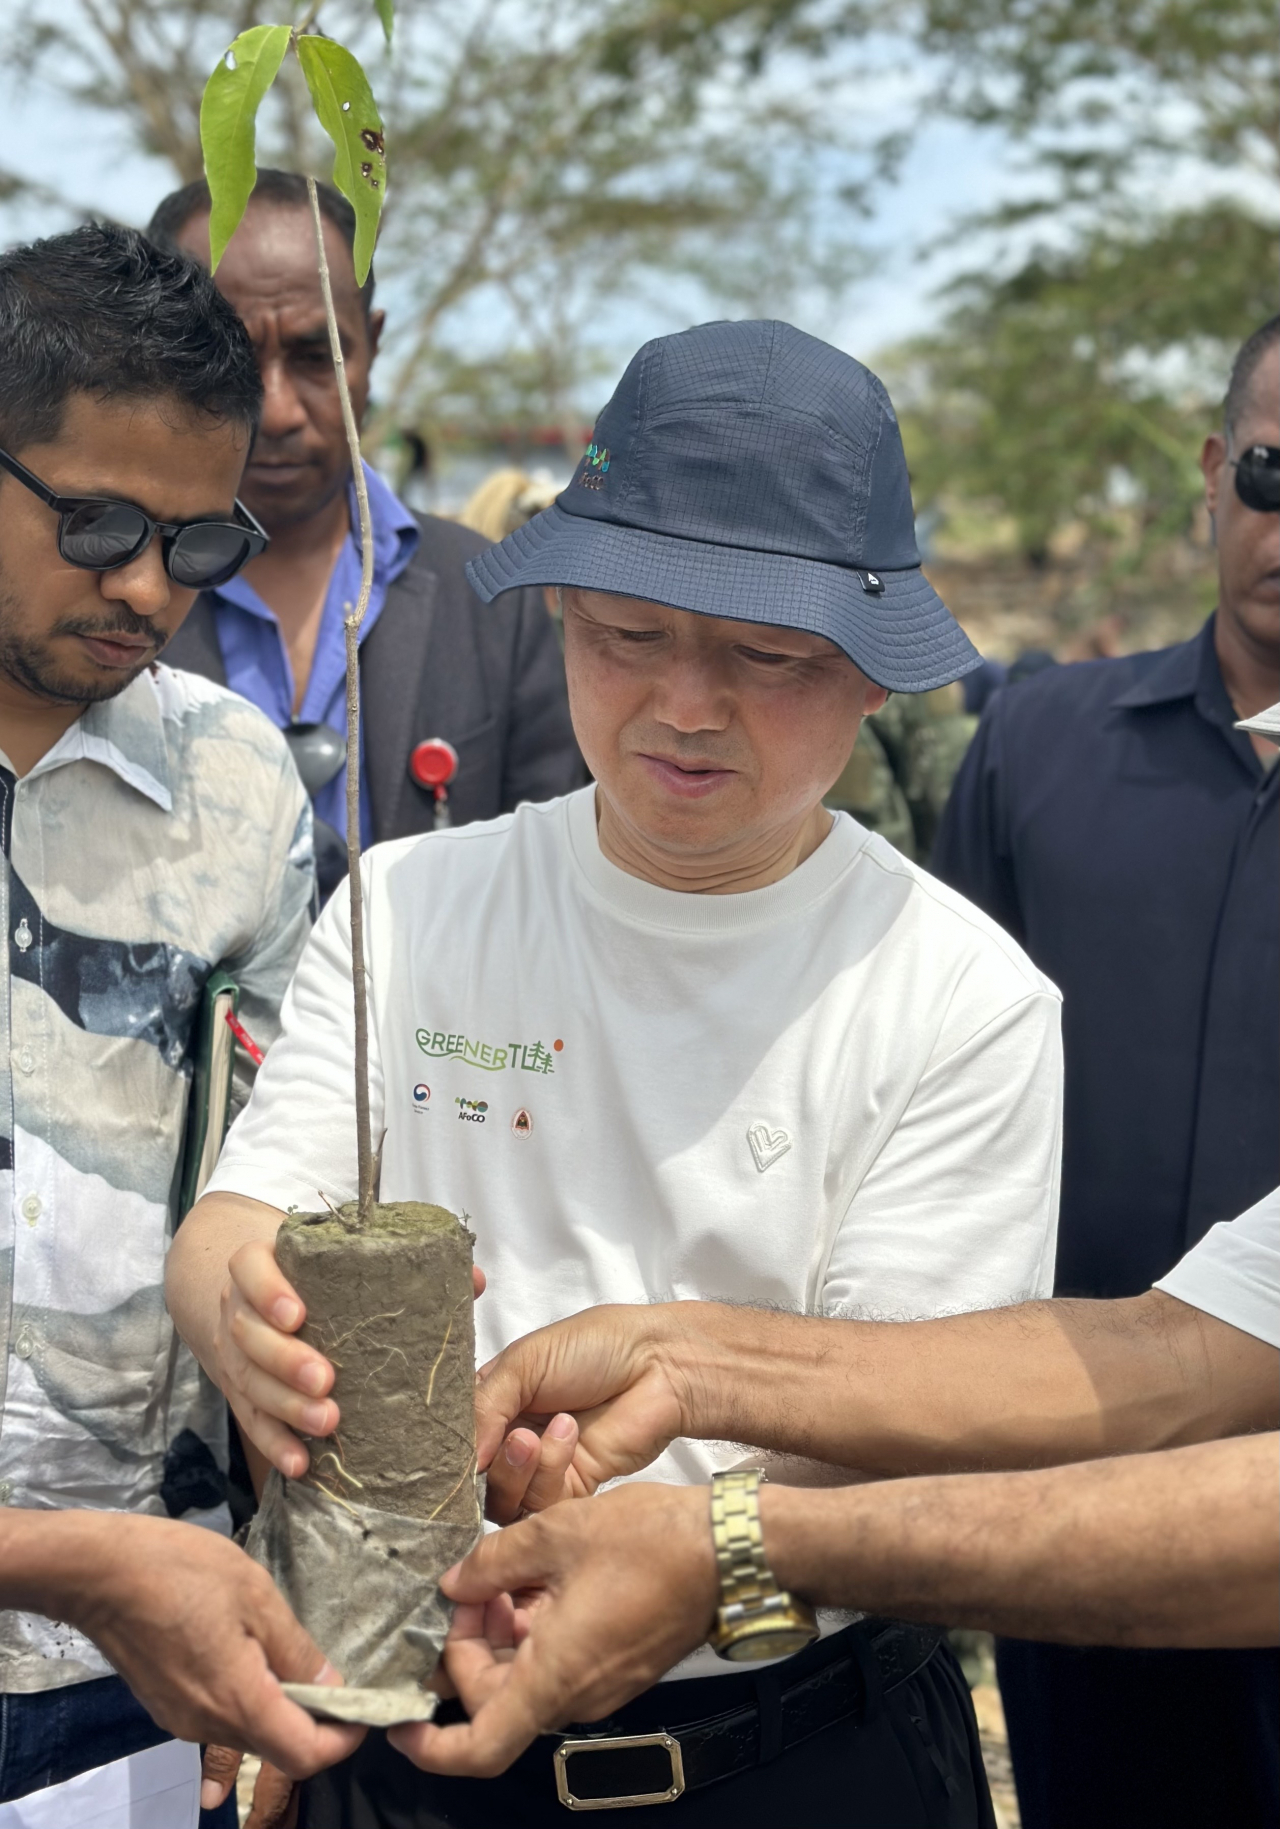 Korea Forest Service Minister Nam Sung-hyun plants sandalwood, celebrating the 7th National Day of Sandalwood and Forestry in Manatuto Municipality, the Democratic Republic of Timor-Leste, Friday. (Korea Forest Service)